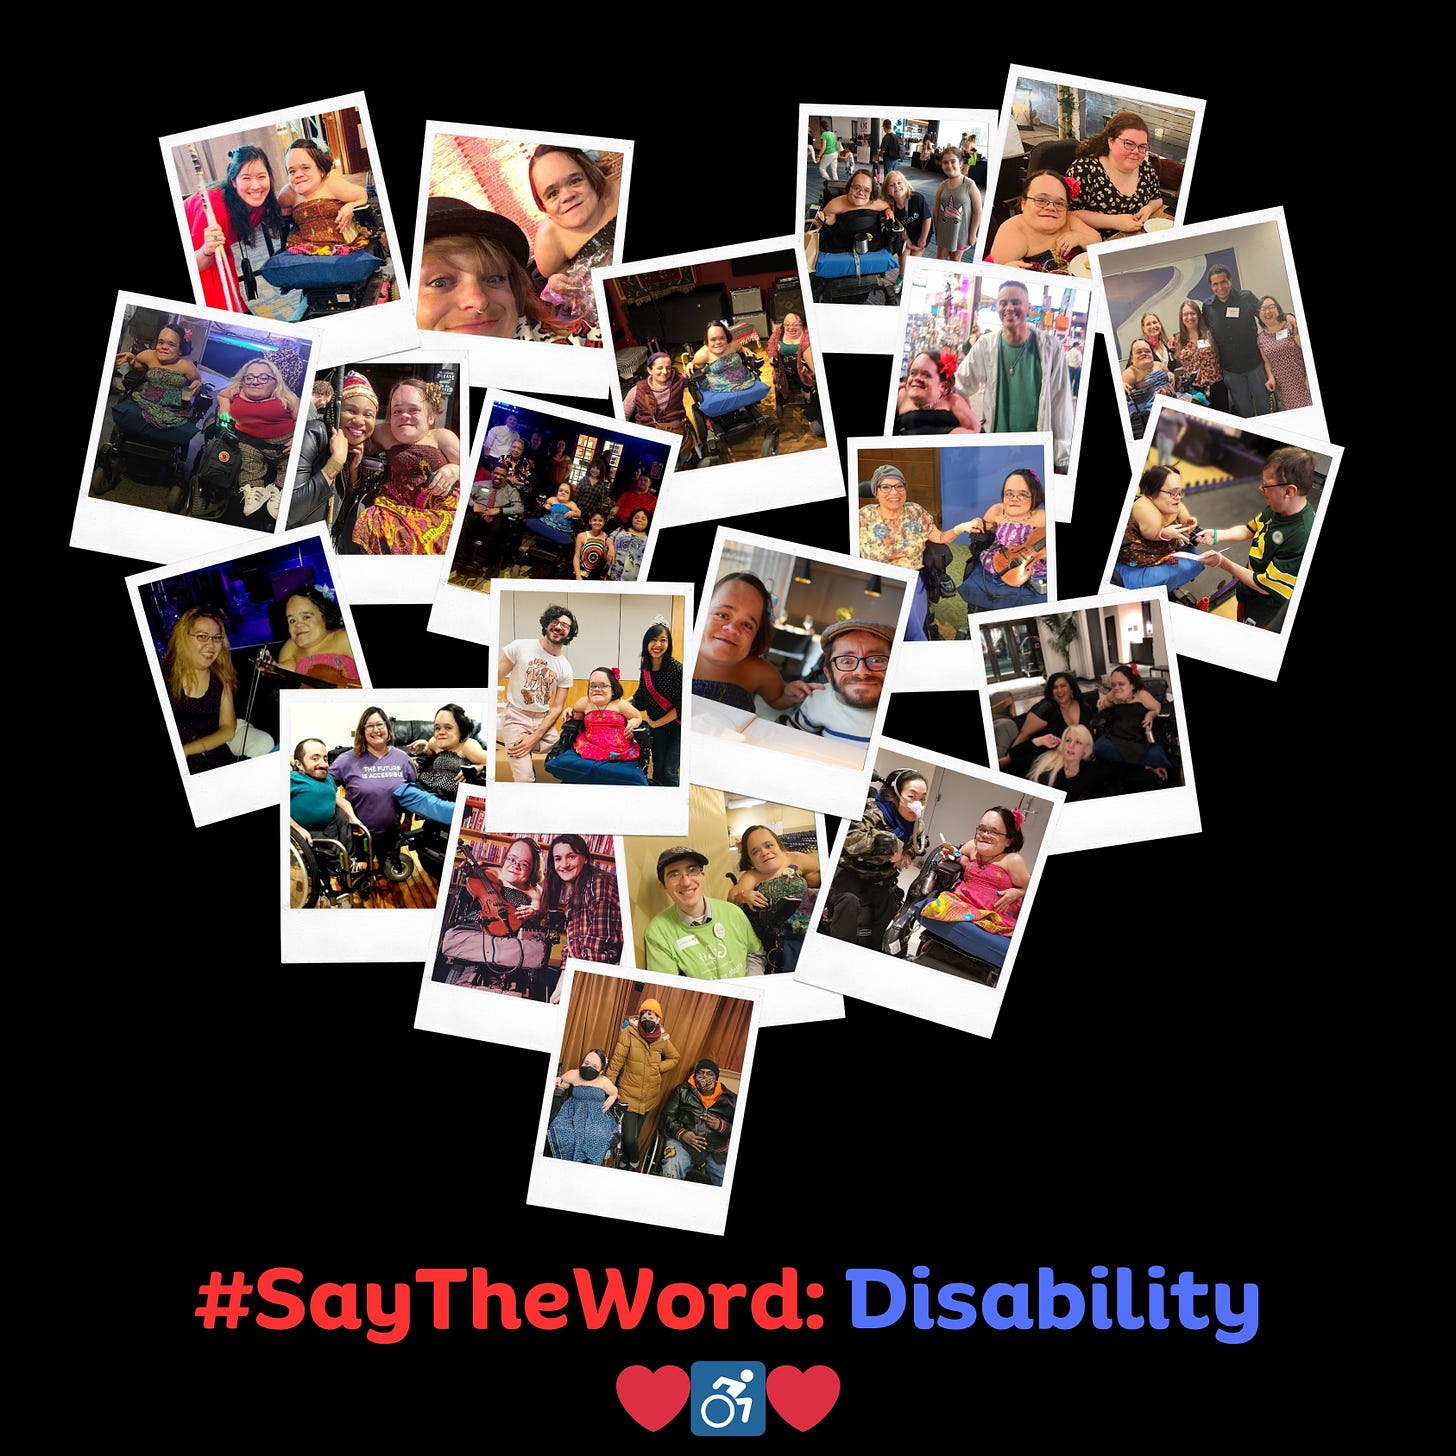 A collage depicting many of the disabled people Gaelynn met while on tour. The photos are arranged in the shape of a heart and below the collage it says: #SayTheWord: Disability and below that there is a heart emoji on either side of the blue and white wheelchair emoji, the standardized symbol for disability